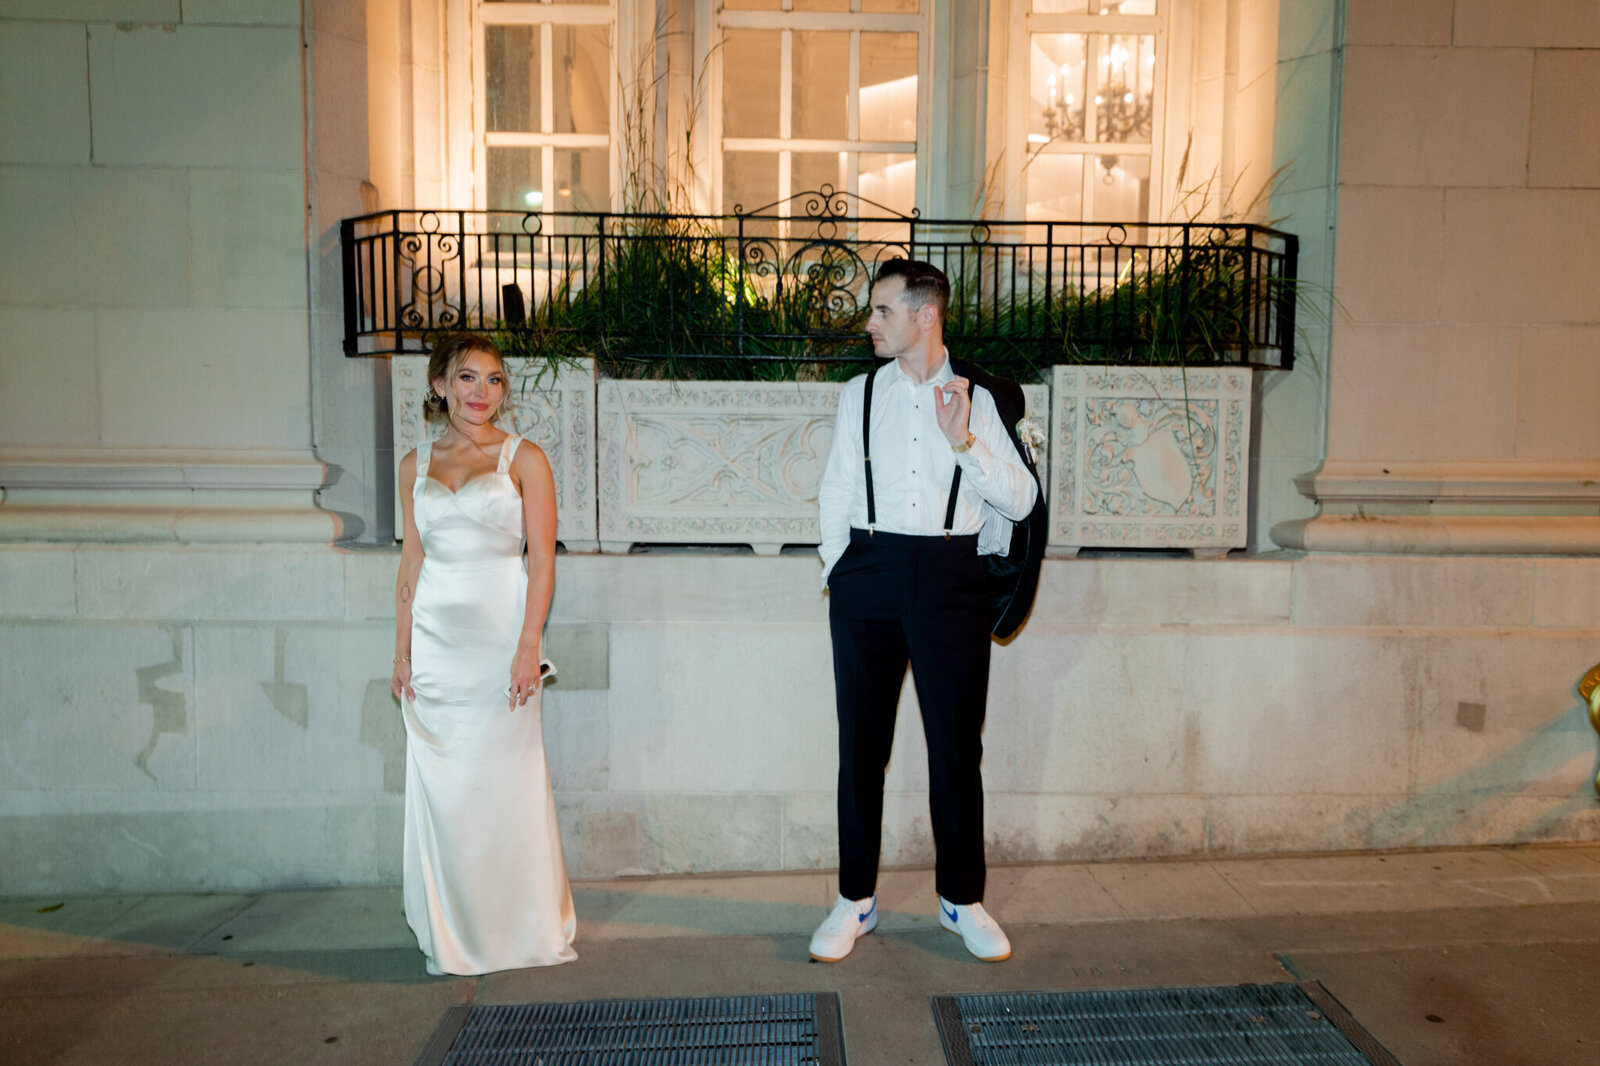 Aly+James_sneaks (211 of 214)